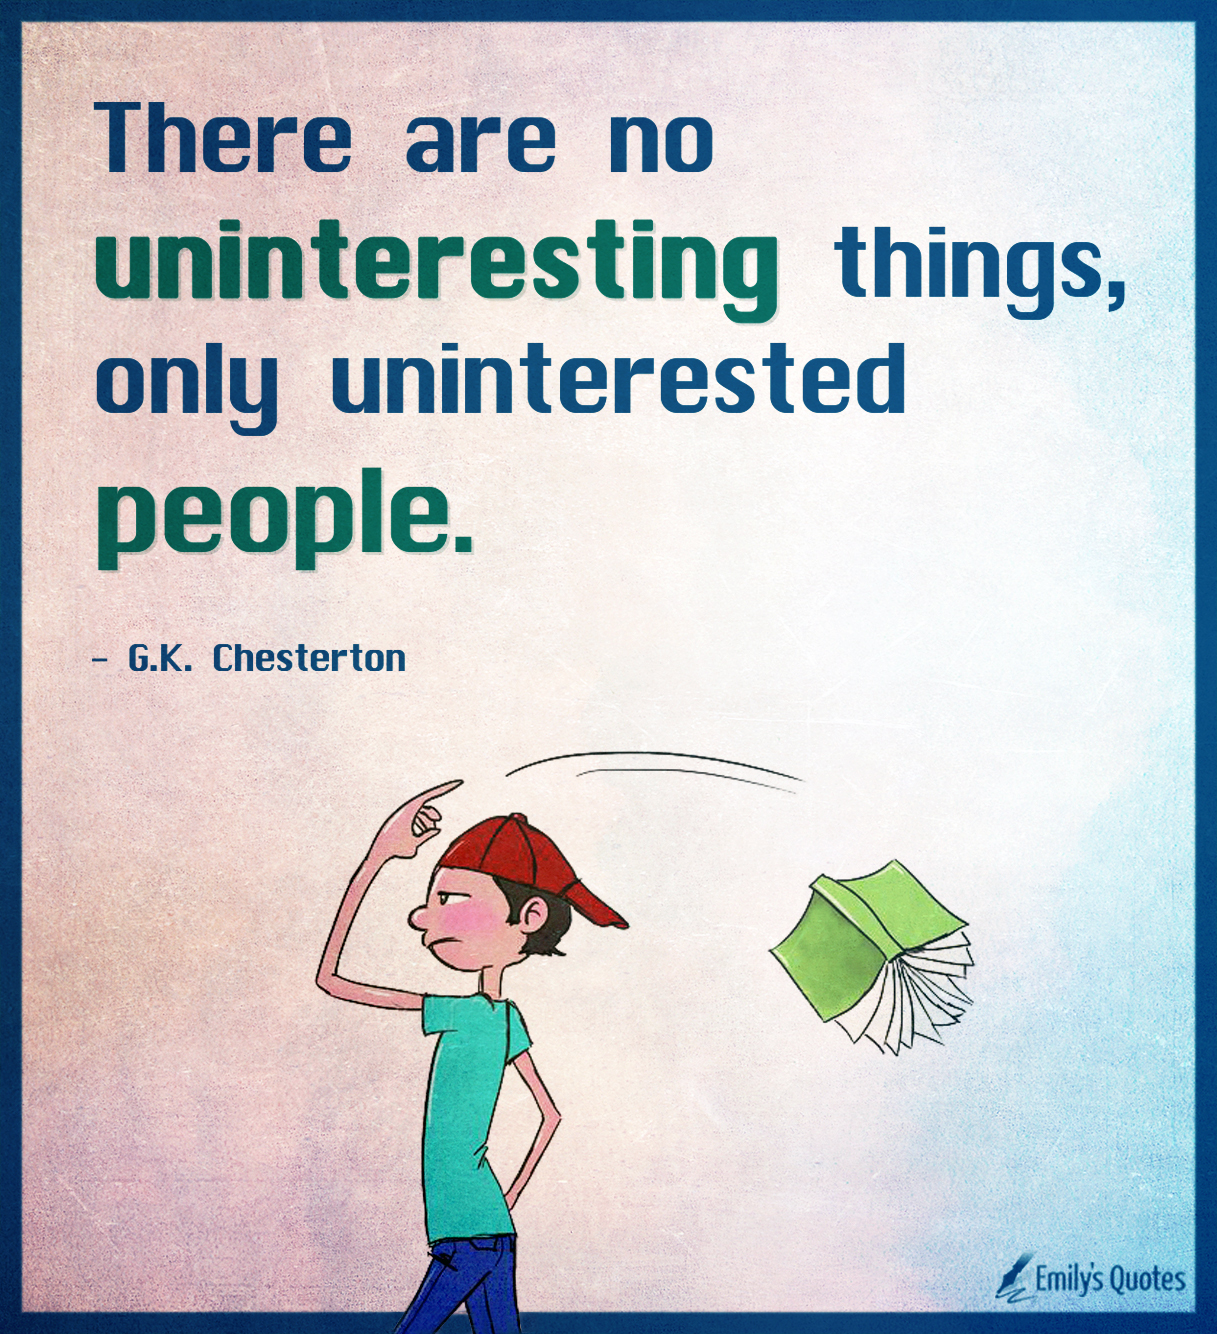 There are no uninteresting things, only uninterested people